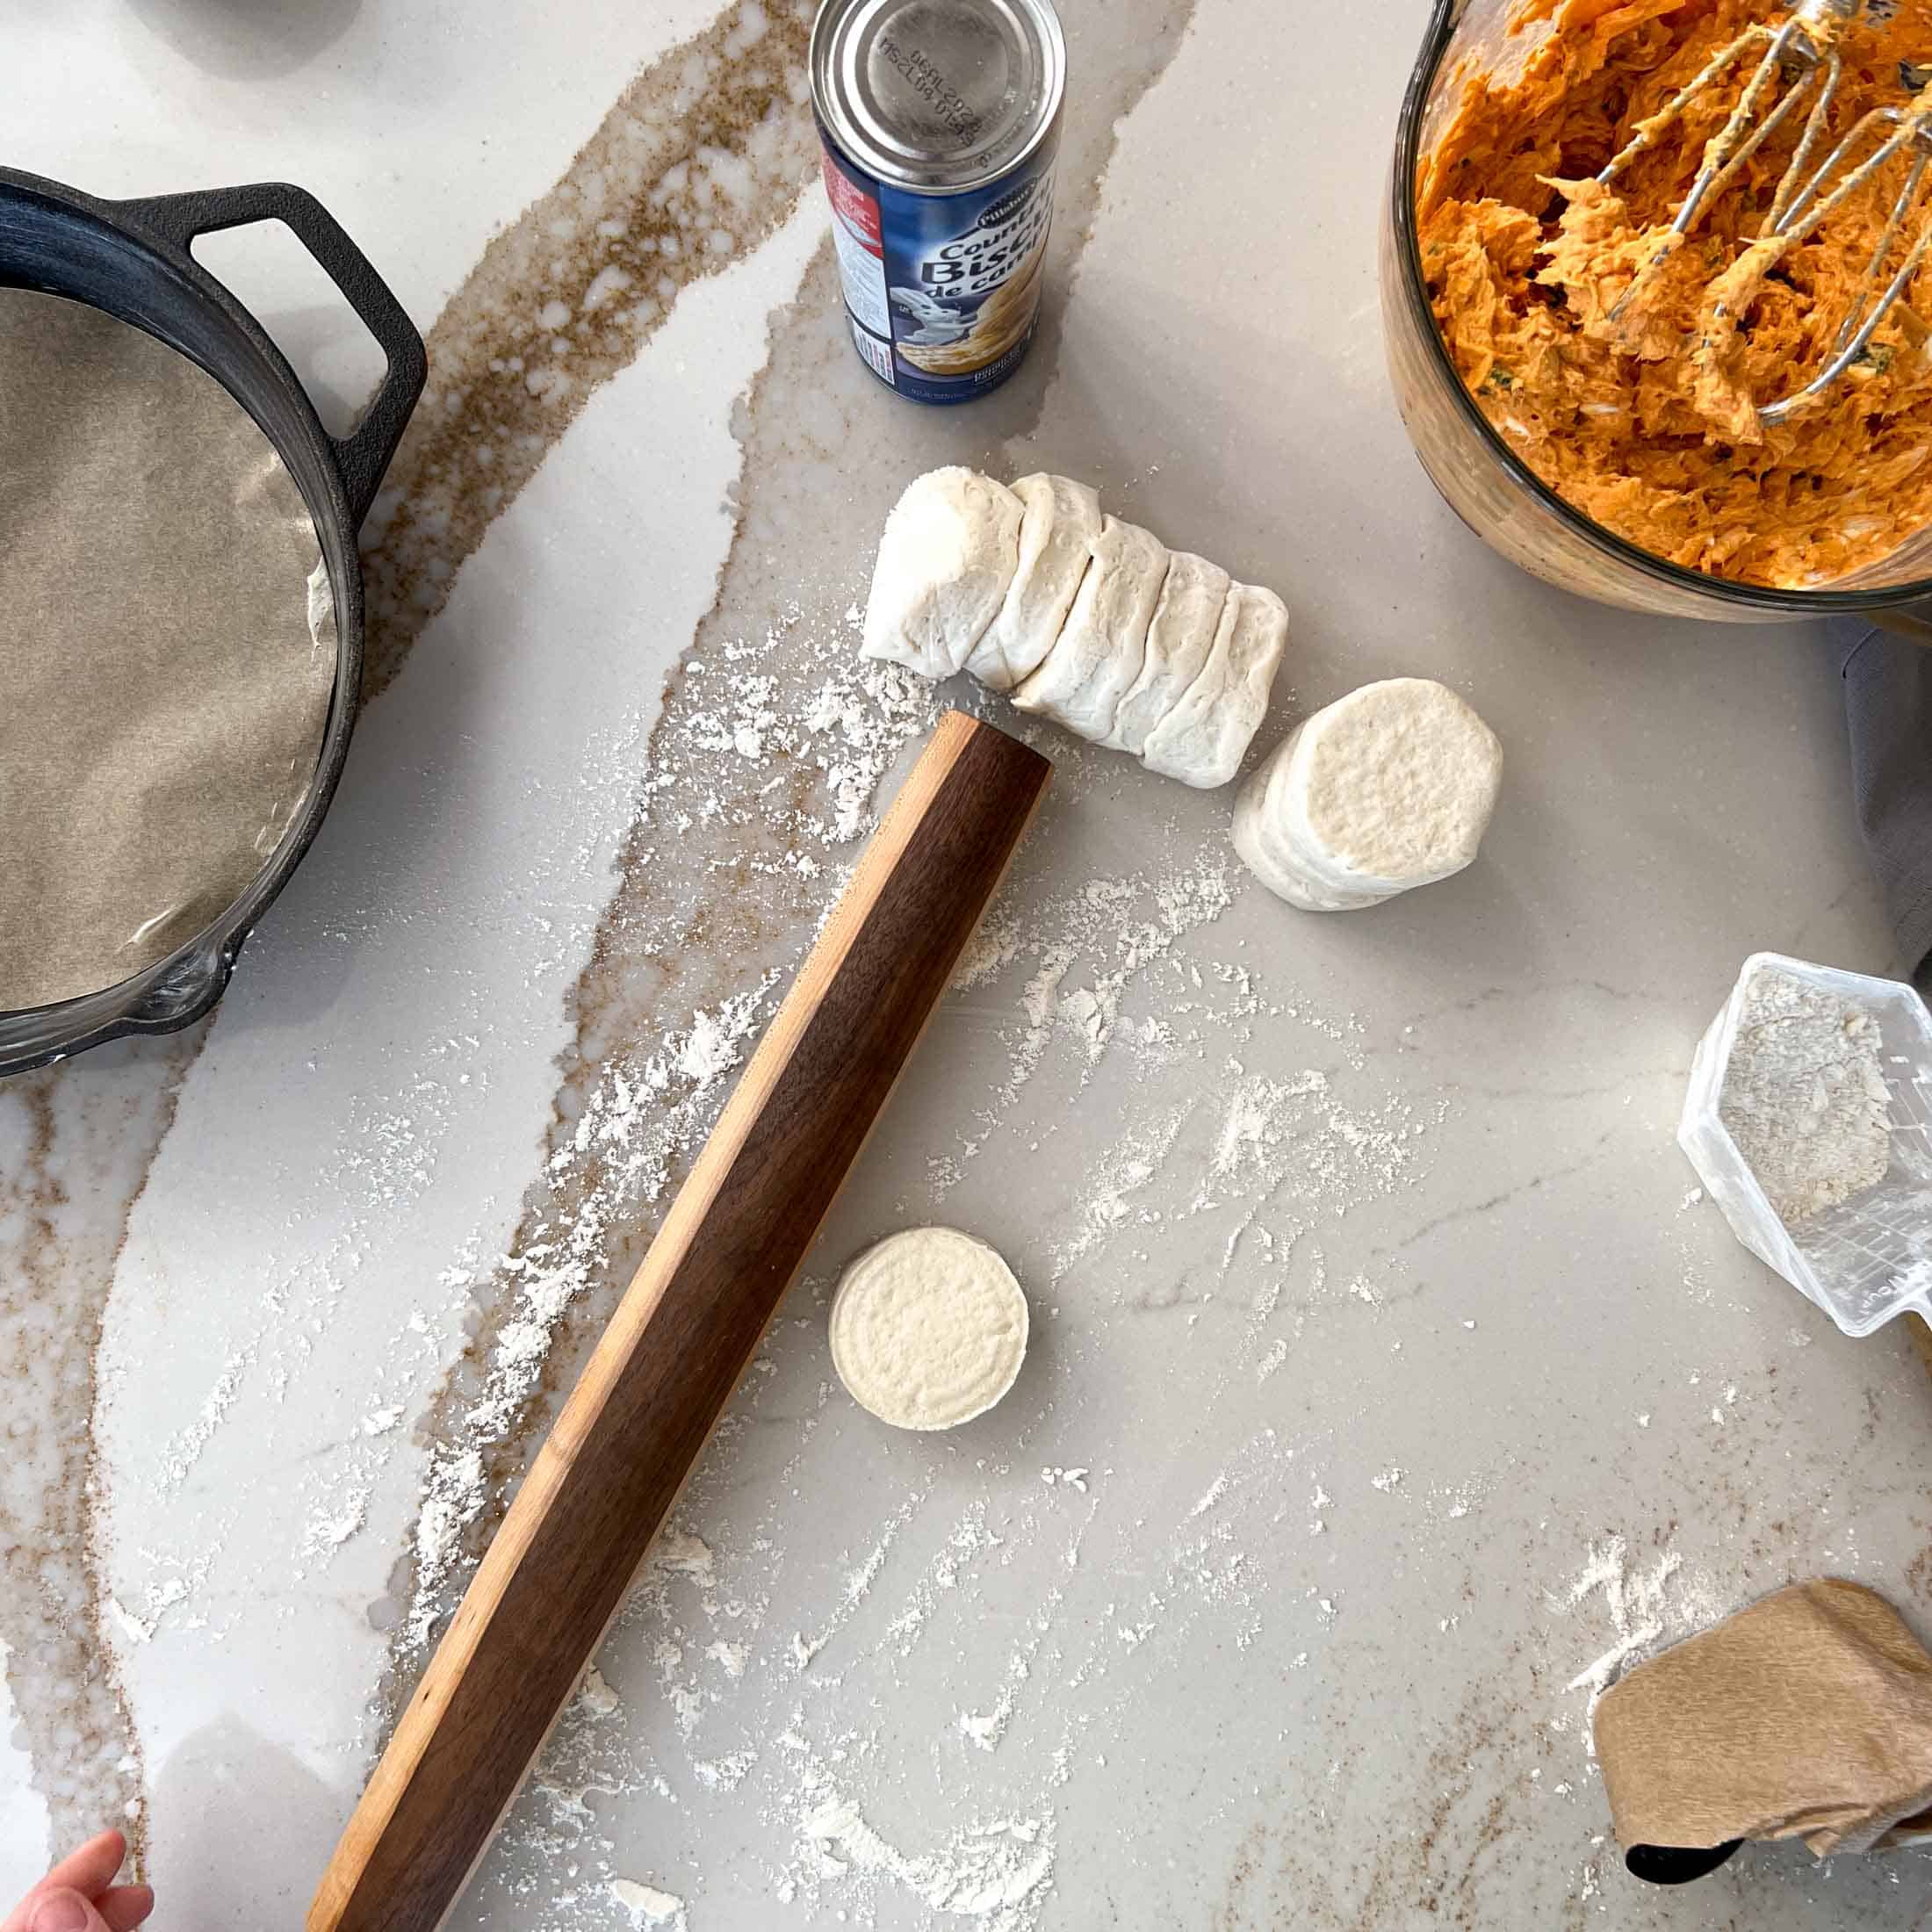 Refrigerator biscuits sitting on a floured countertop with a rolling pin and other ingredients.